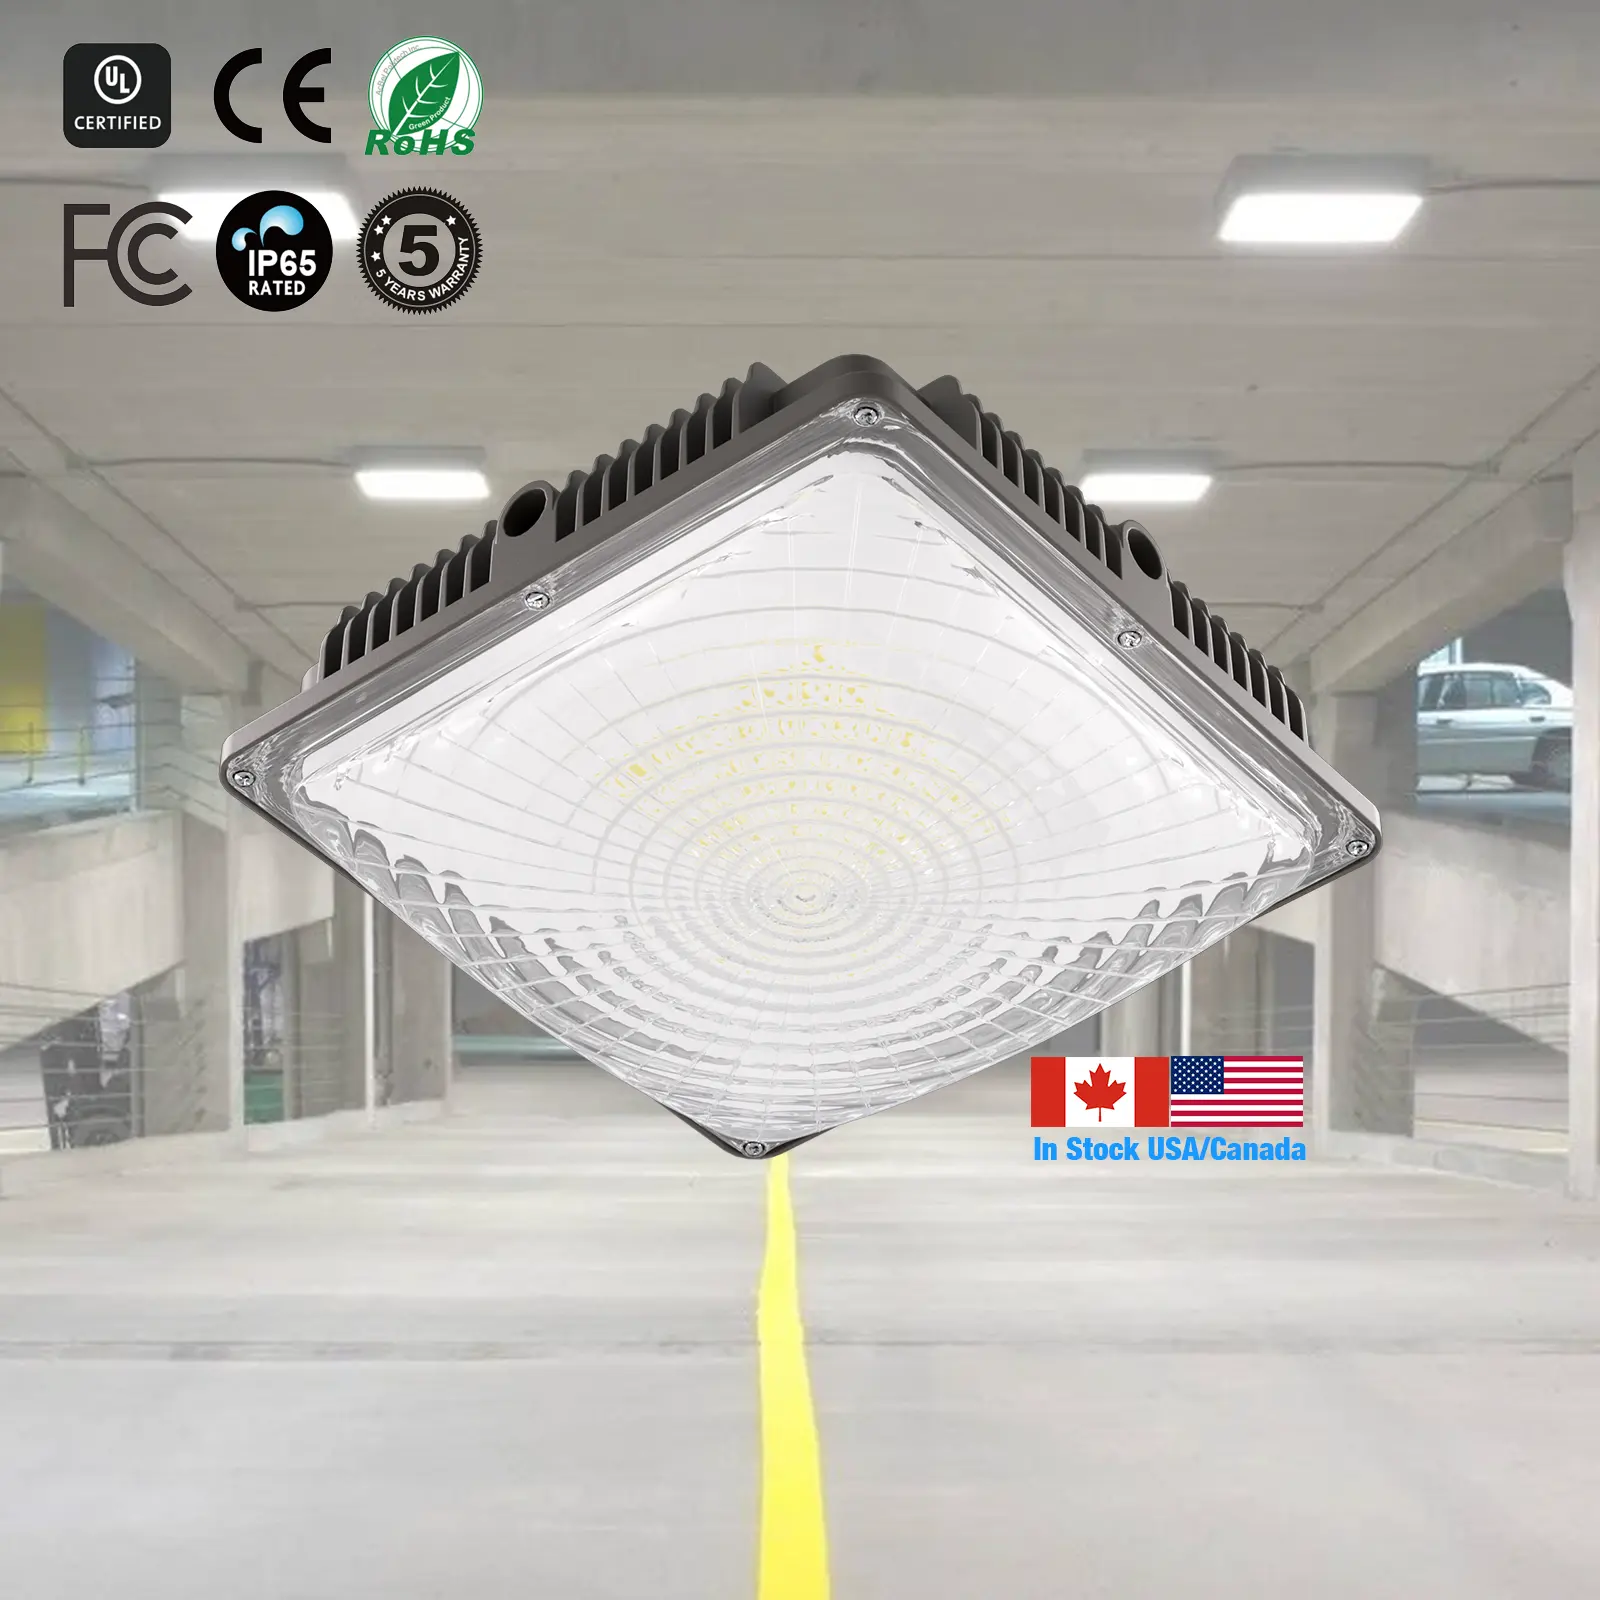 Stock In US Canada Indoor LED Parking Lot Light 150lm/W IP65 50000 Life Hours The LED Canopy Light